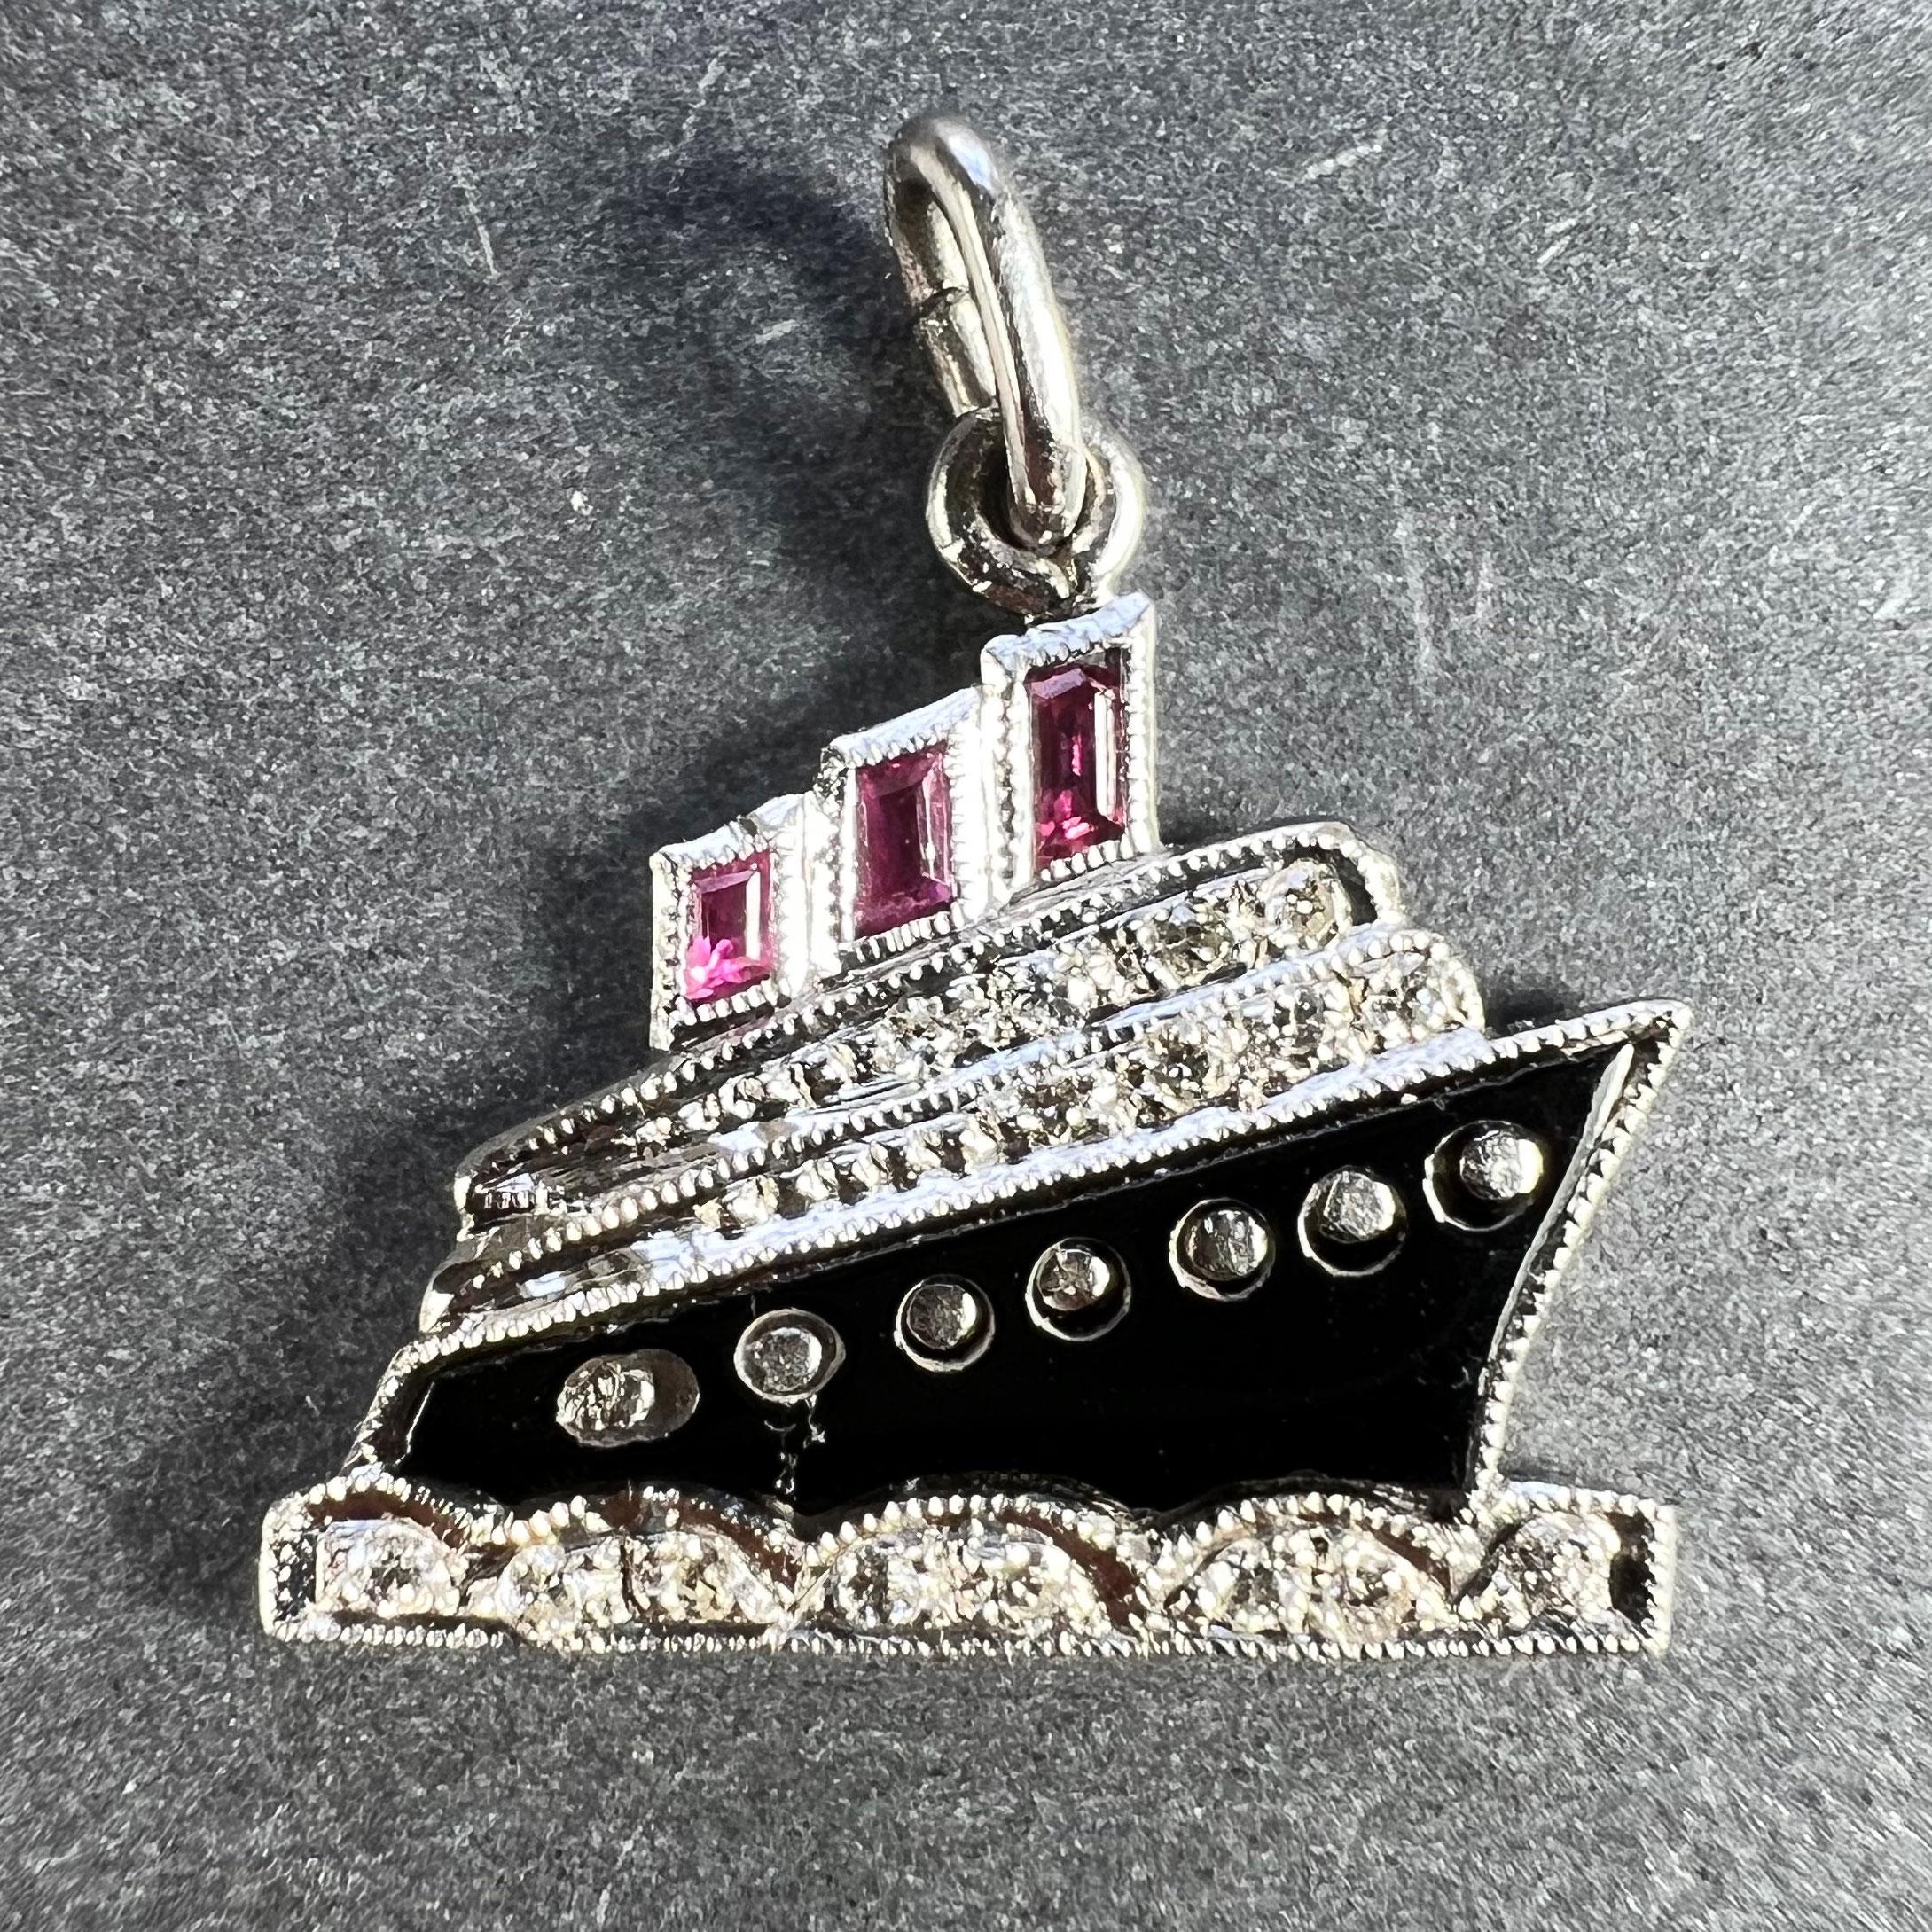 An Art Deco platinum charm pendant designed as an ocean liner boat or steamship. Set with 16 round brilliant-cut diamonds, three fancy-cut rubies and an onyx tablet cut to the shape of the ship's hull. Unmarked but tested as platinum.

Gemstone